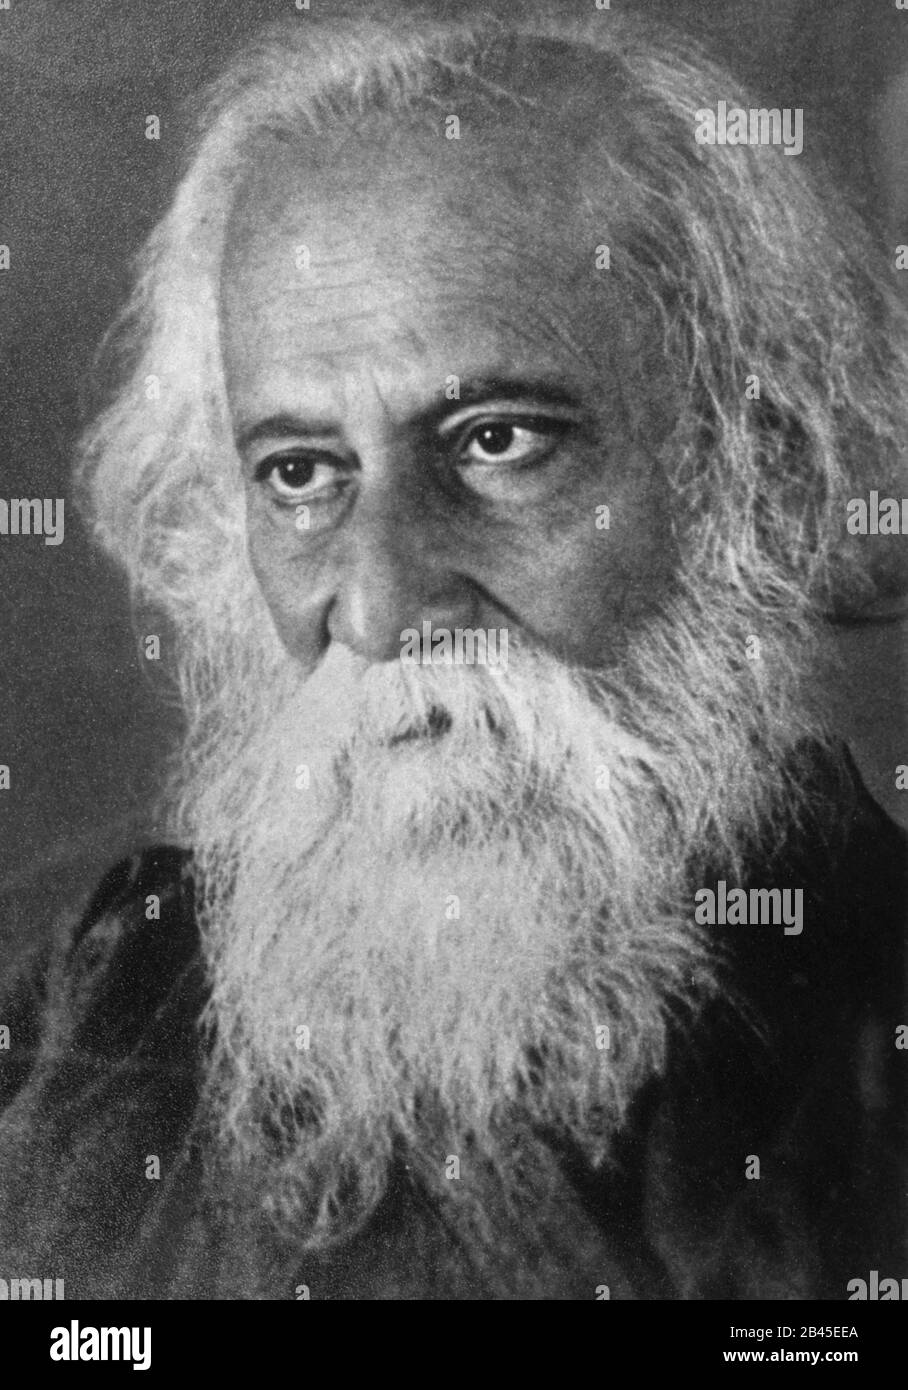 Rabindranath Tagore, Bengali poet, writer, composer, philosopher, painter, India, Asia, 1930s, old vintage 1900s picture Stock Photo